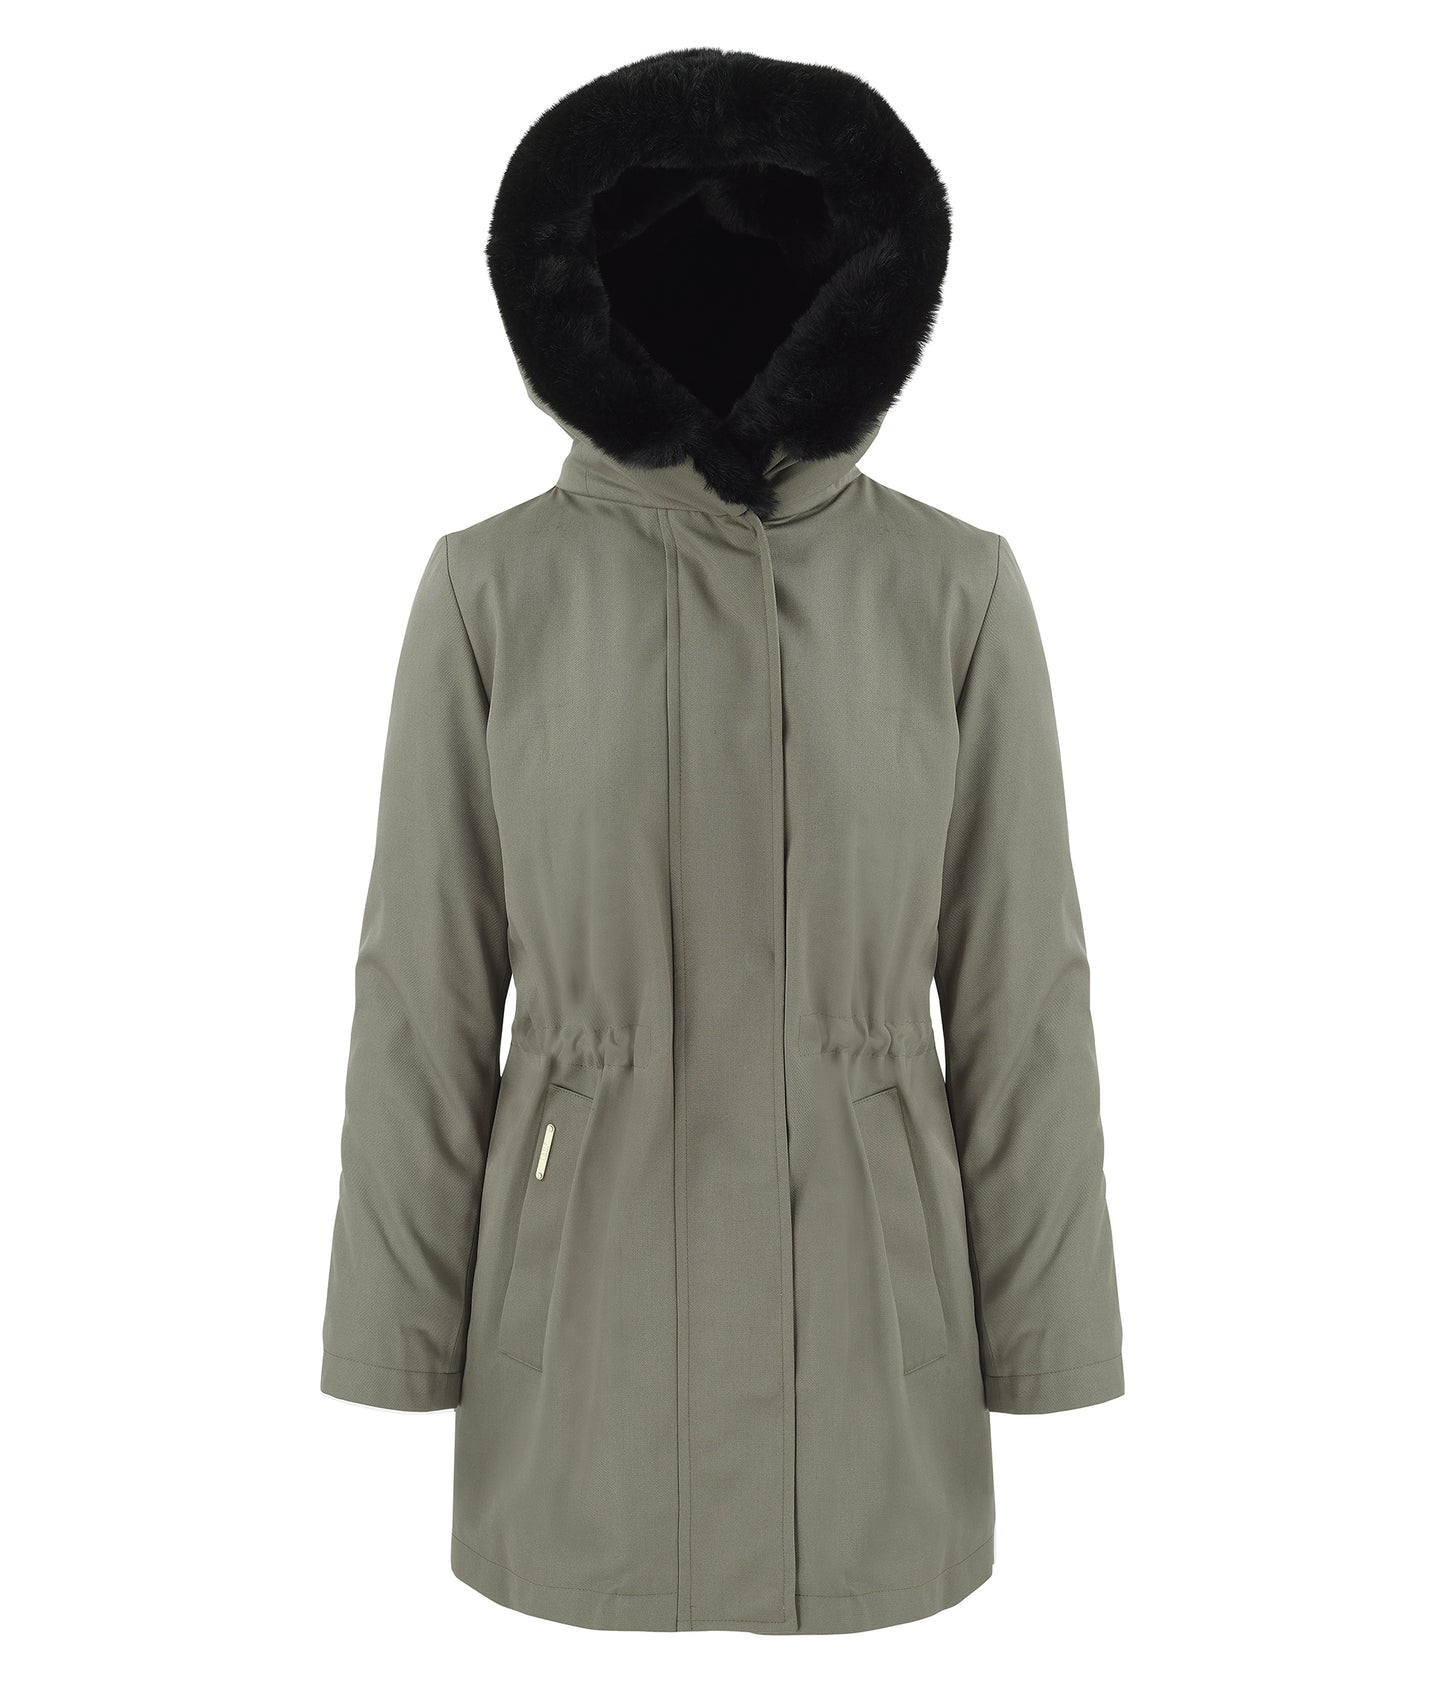 Arctic Parka in Sage with Black Faux Hood